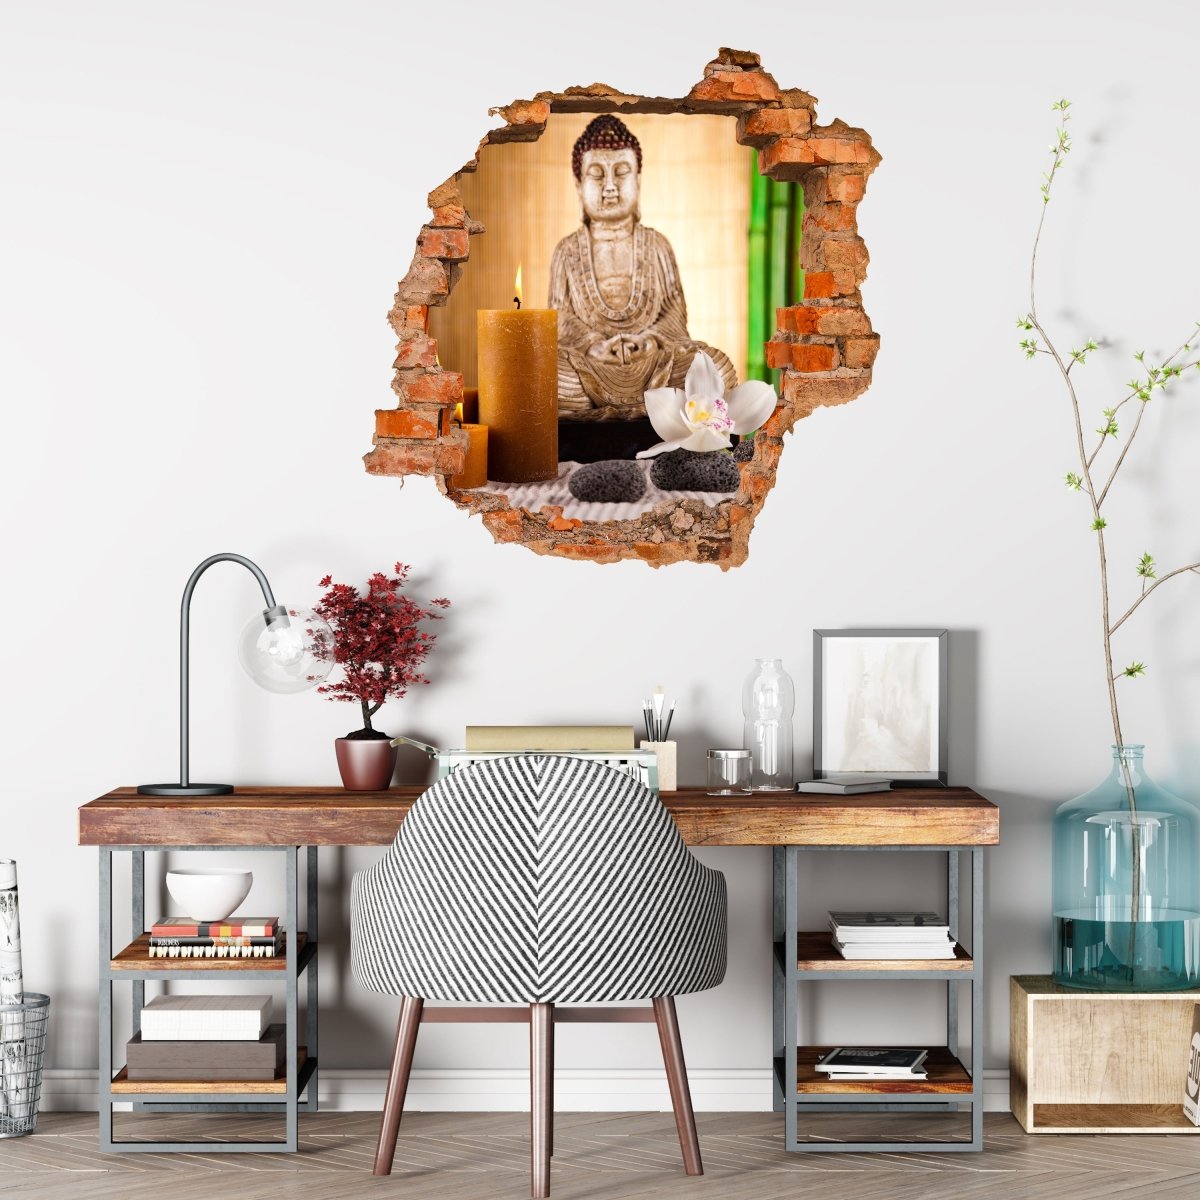 3D Buddha with Candle Wall Sticker - Vivid Colors - Wall Decal M0970